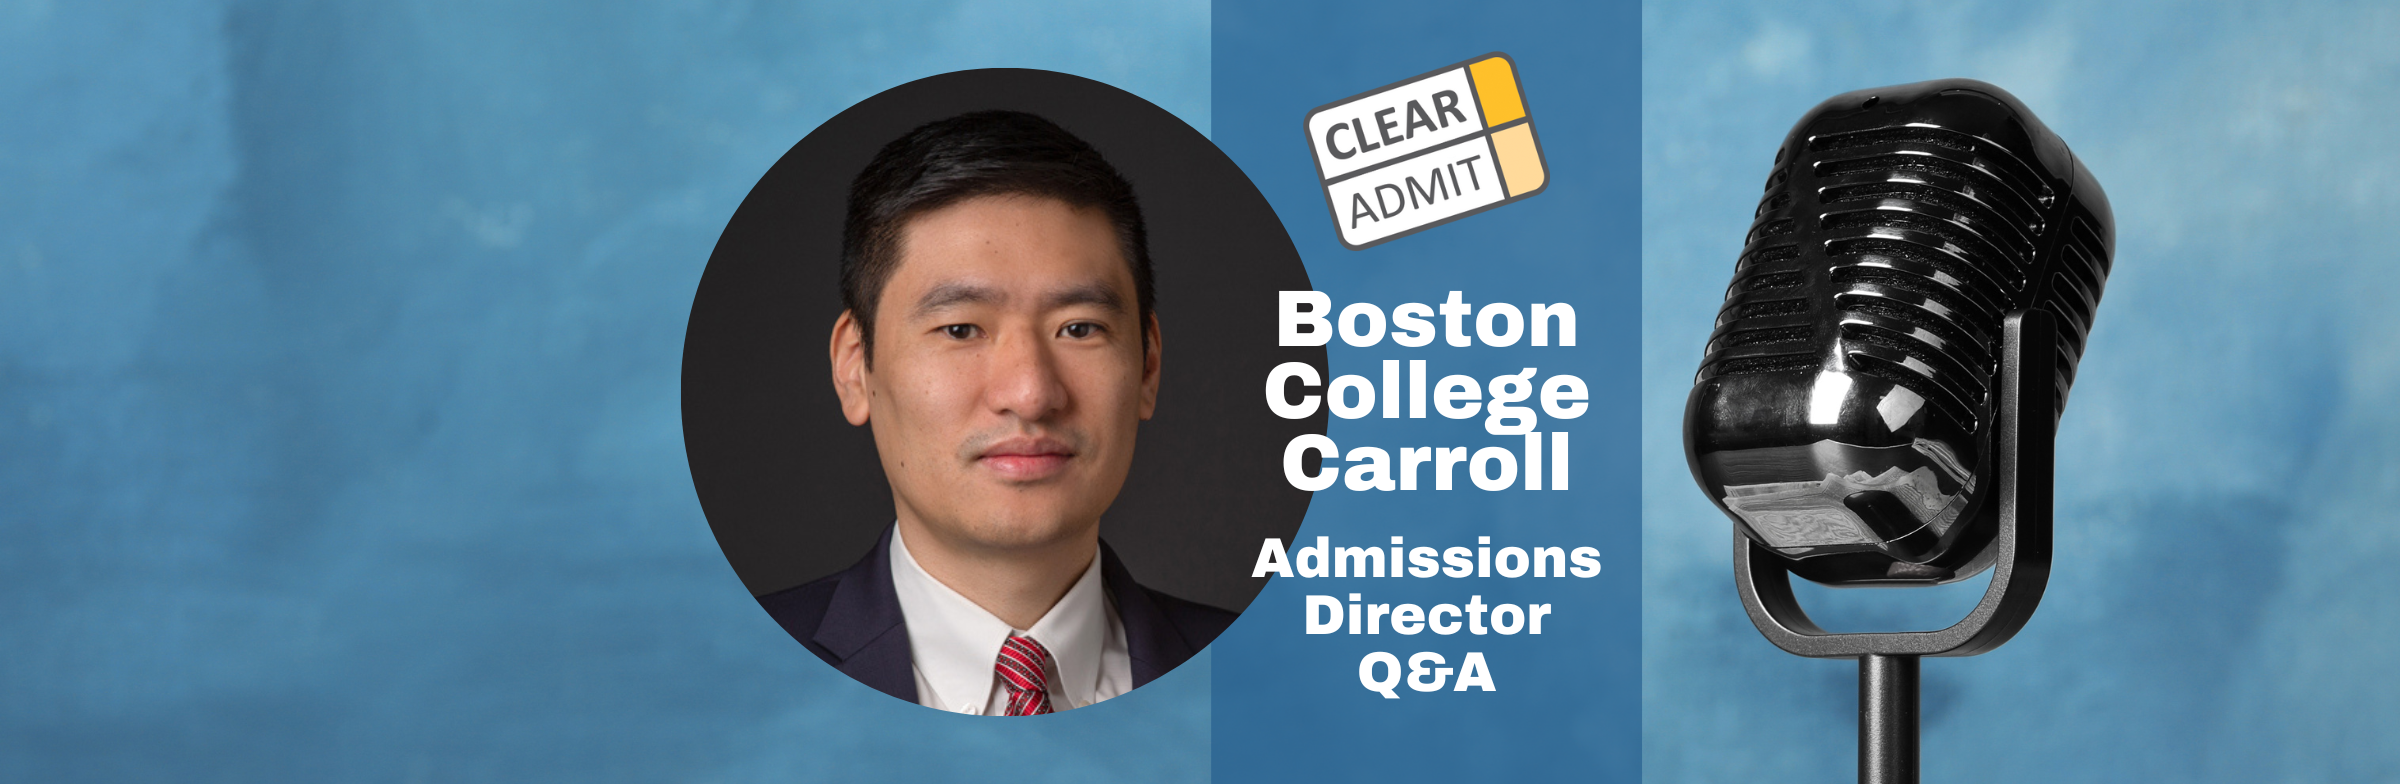 Image for Admissions Director Q&A: Justin Aier of Boston College’s Carroll School of Management